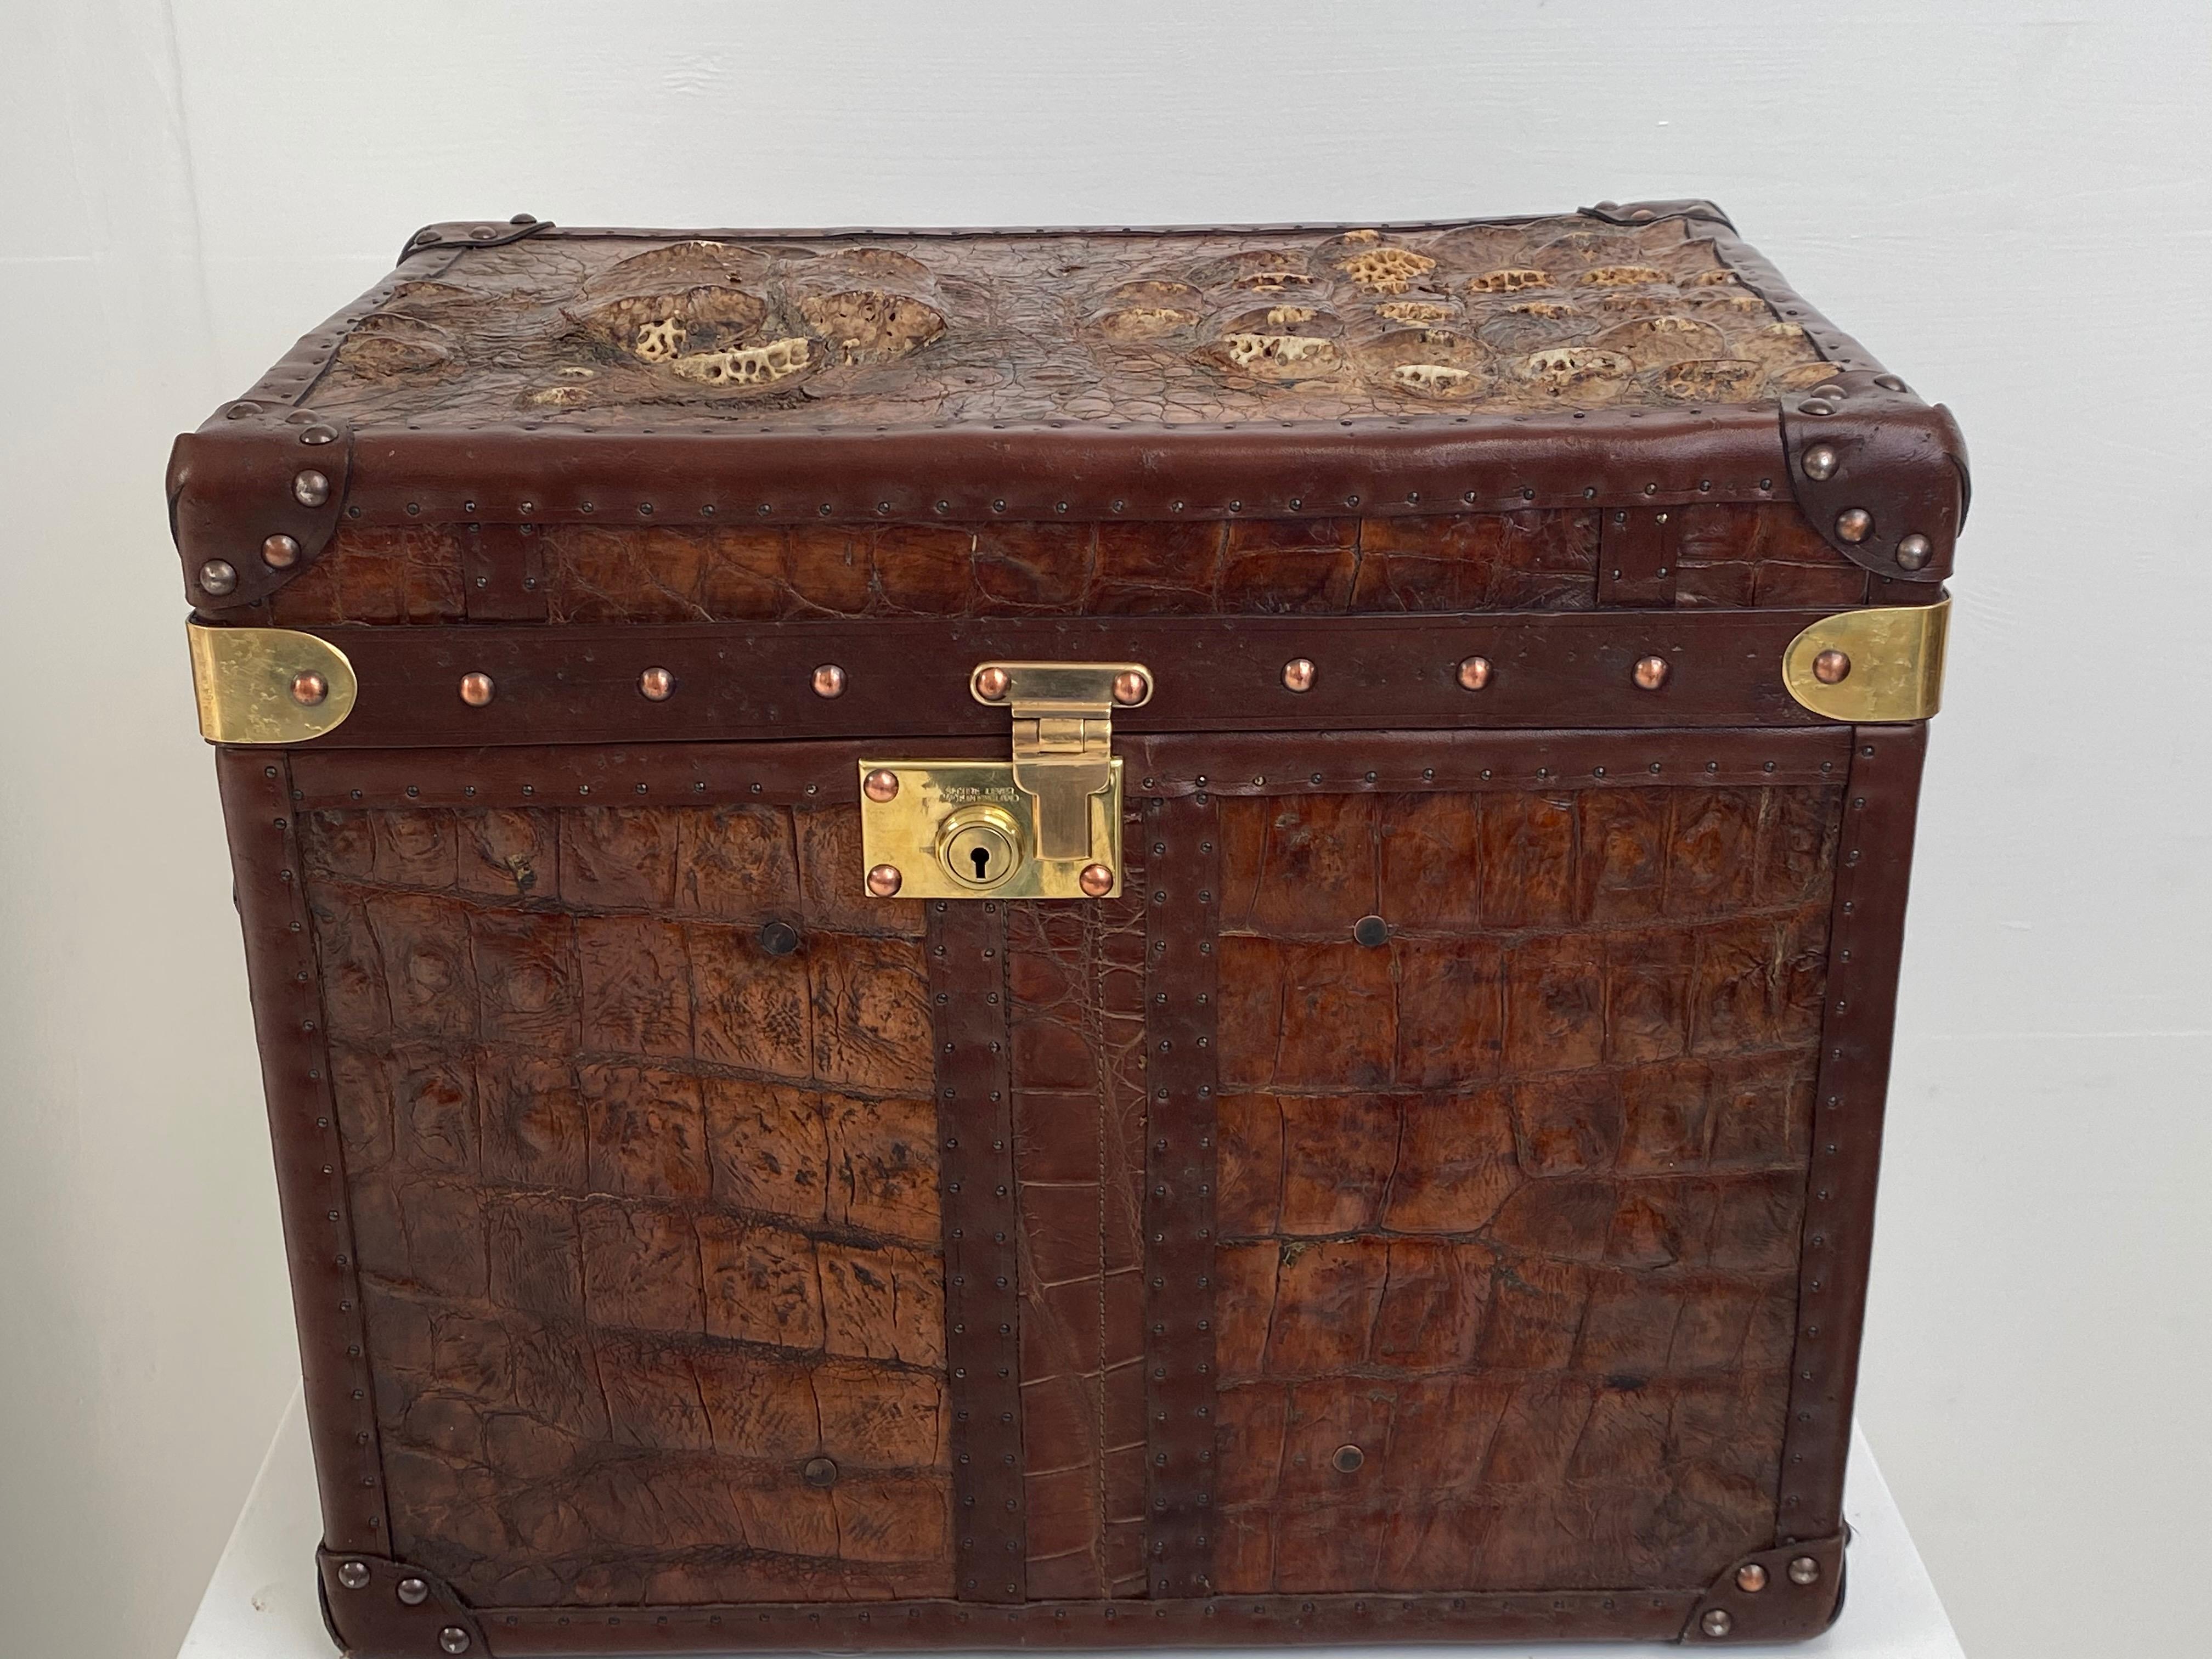 Beautiful trunk in Leather and Crocodile skin,
England, early 20th century,
nicely restored with great, stunning patina, brown leather trimming
and brass locks and clasps, corners.